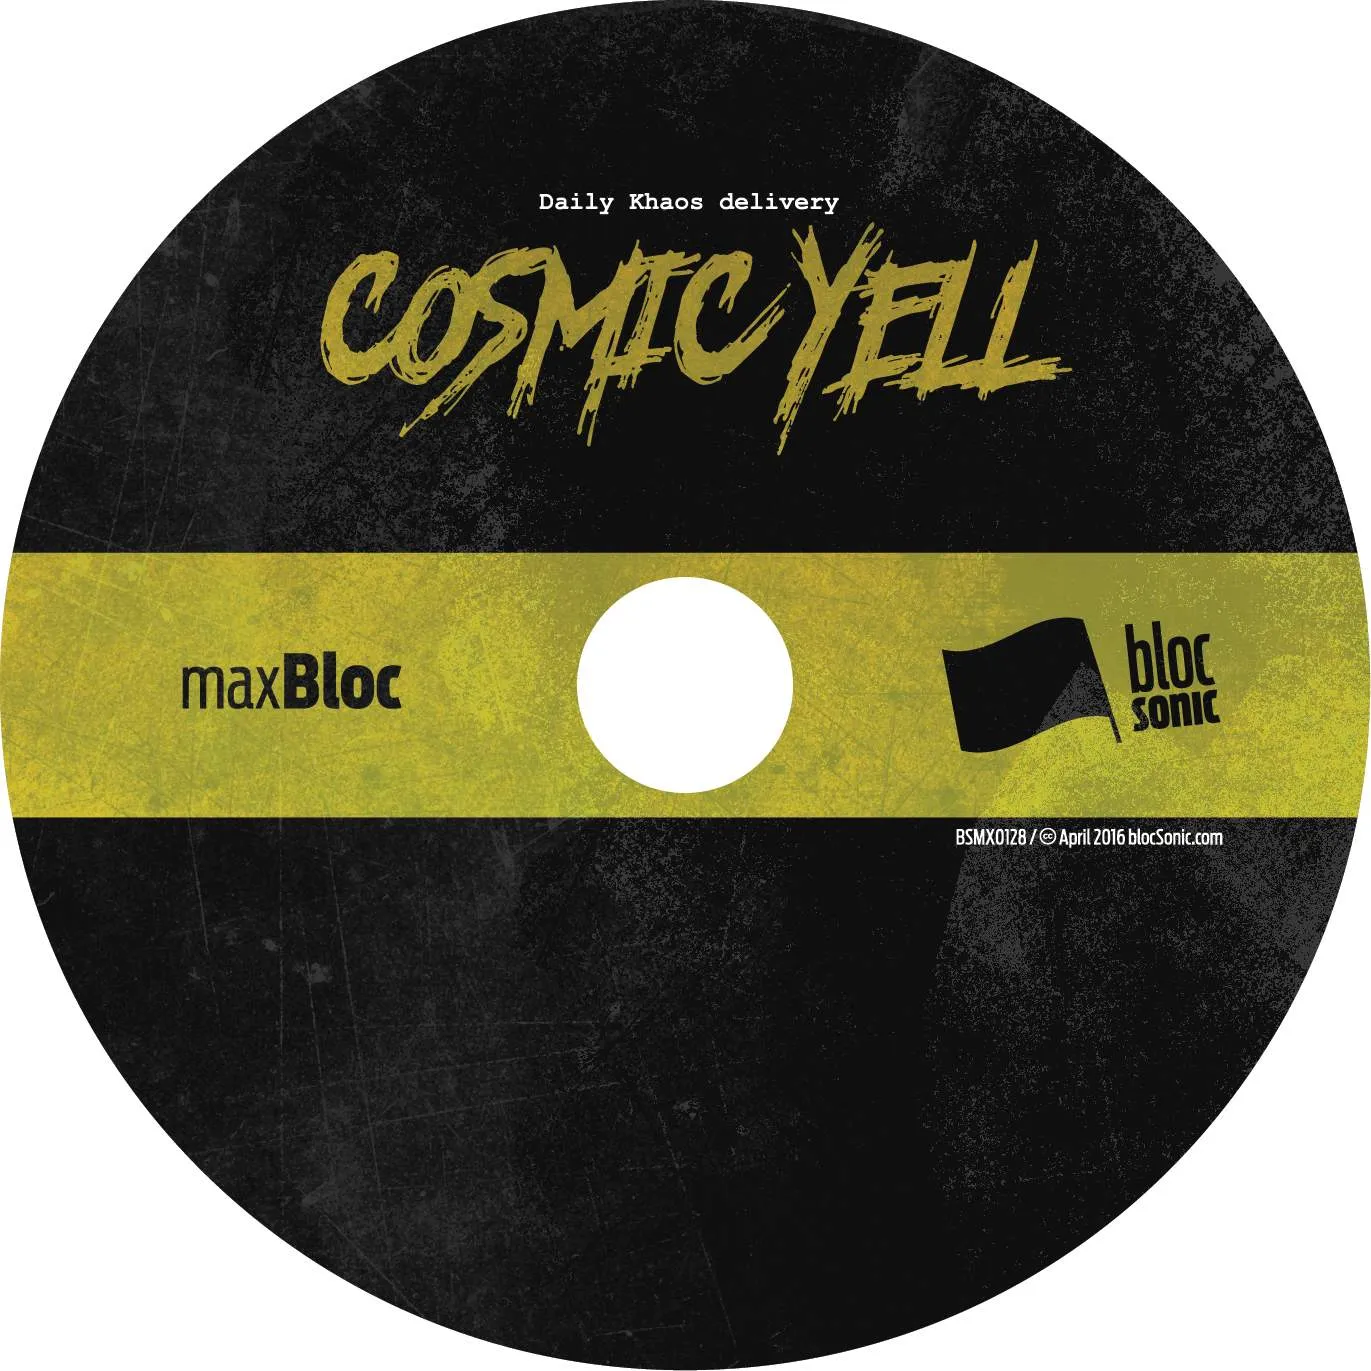 Album disc for “Cosmic Yell” by Daily Khaos delivery